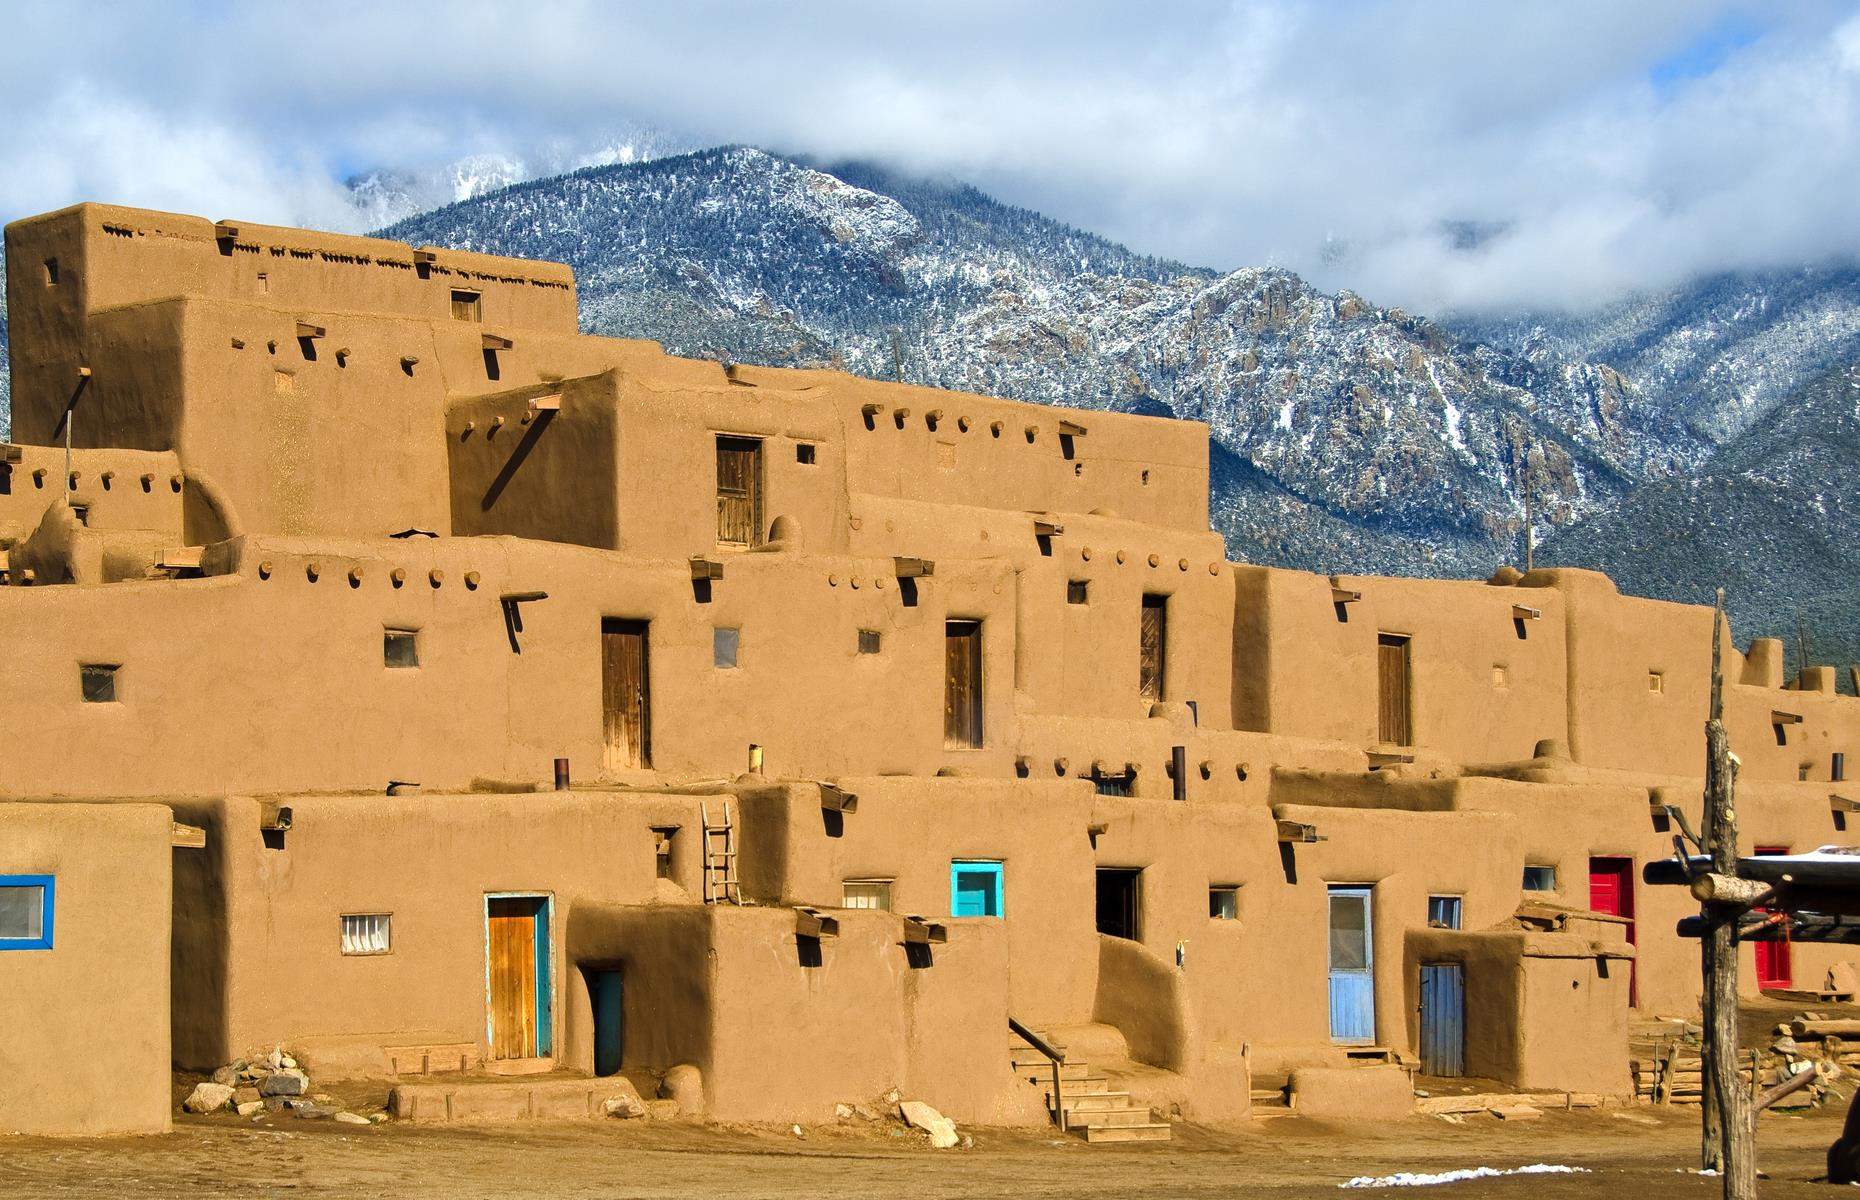 <p>The road continues to the traditional weaving village of Chimayó and El Santuario de Chimayó, a church dating back to 1816 whose “miraculous dirt” is believed by some to have healing properties. <a href="https://taospueblo.com/">Taos Pueblo</a>, with its still-occupied 1,000-year-old adobe buildings, is temporarily closed, but check for updates. Finally, visitors can return to Santa Fe via a different route: the Low Road loops back from Taos and unveils entirely different landscapes, weaving down to the banks of the Rio Grande and ducking through a narrow canyon.</p>